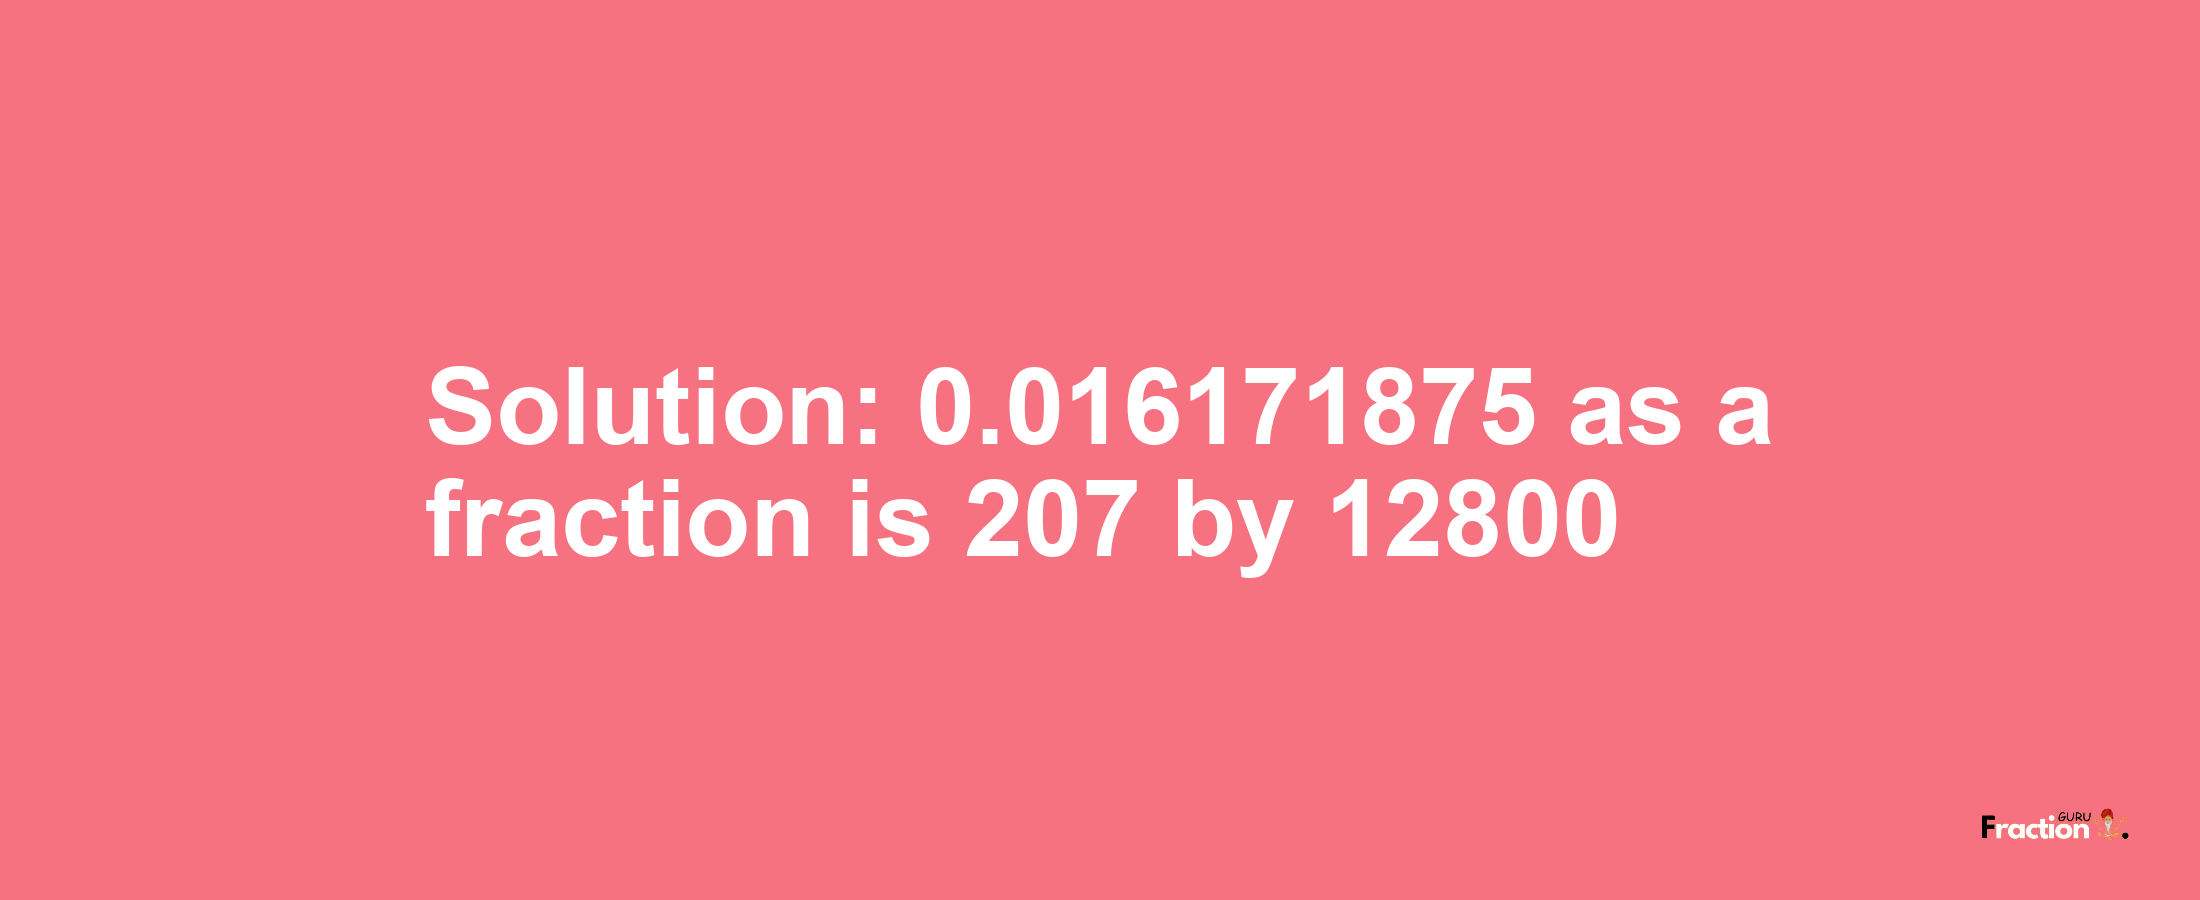 Solution:0.016171875 as a fraction is 207/12800